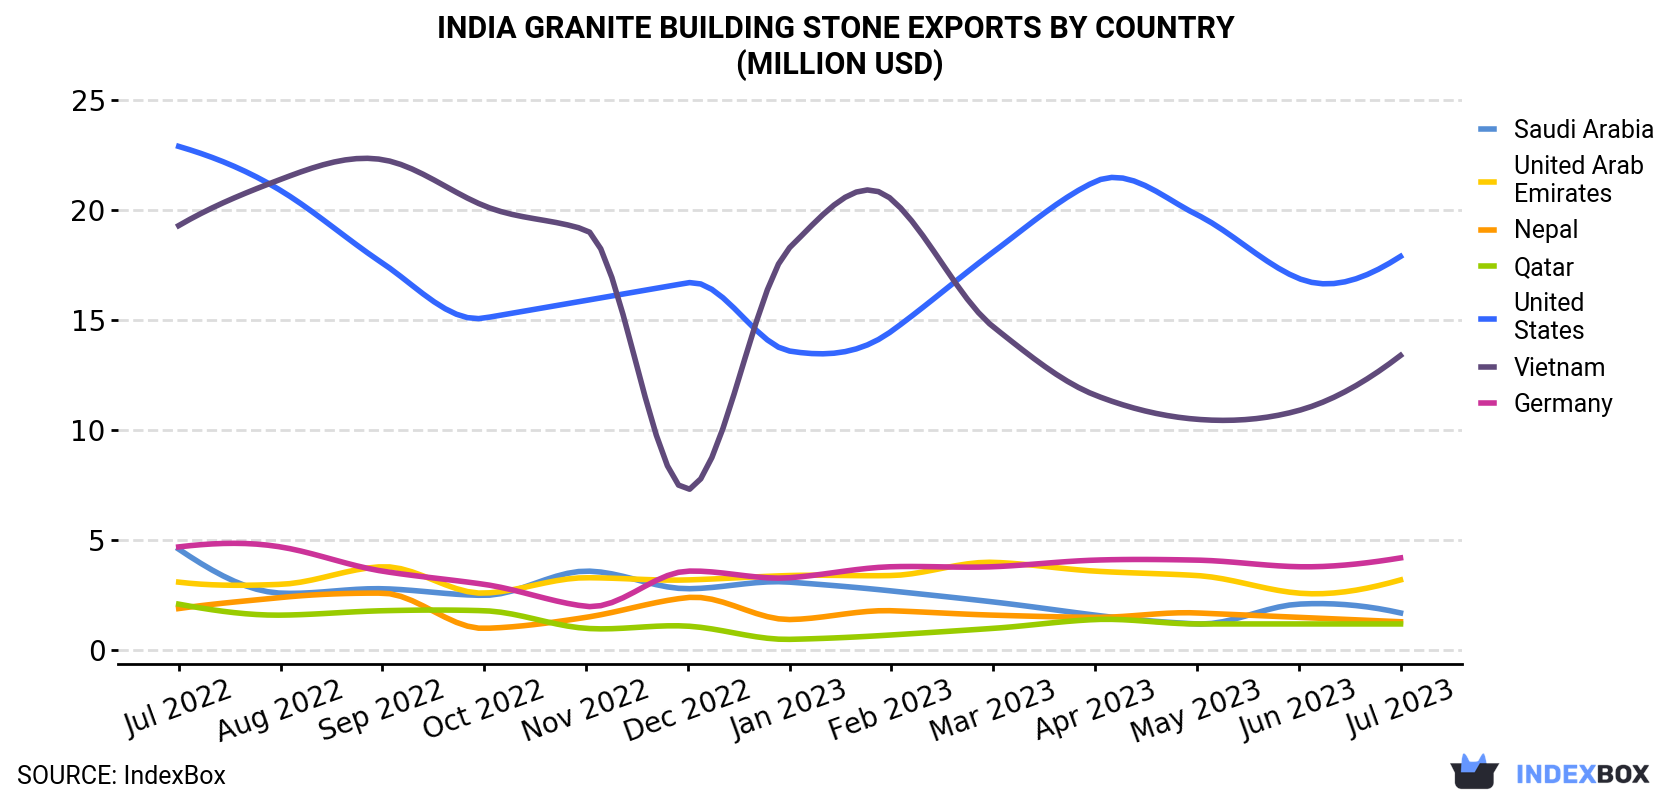 India Granite Building Stone Exports By Country (Million USD)